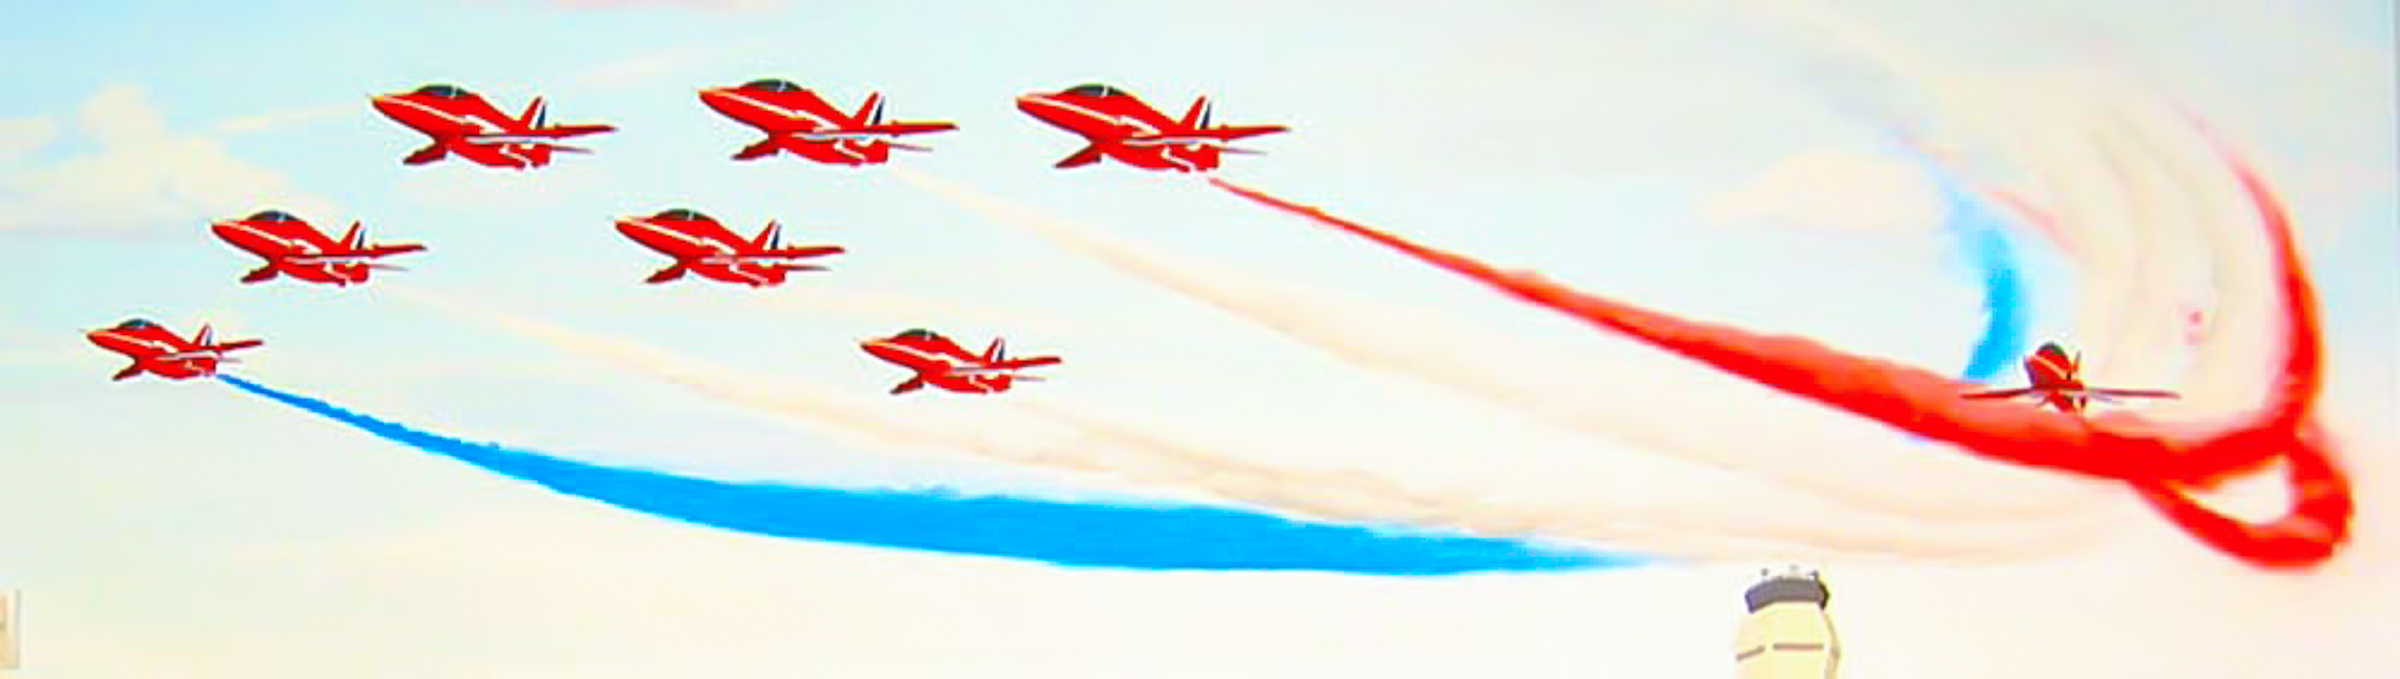 Formation flying by the Royal Air Force RAF Aerobatic Team